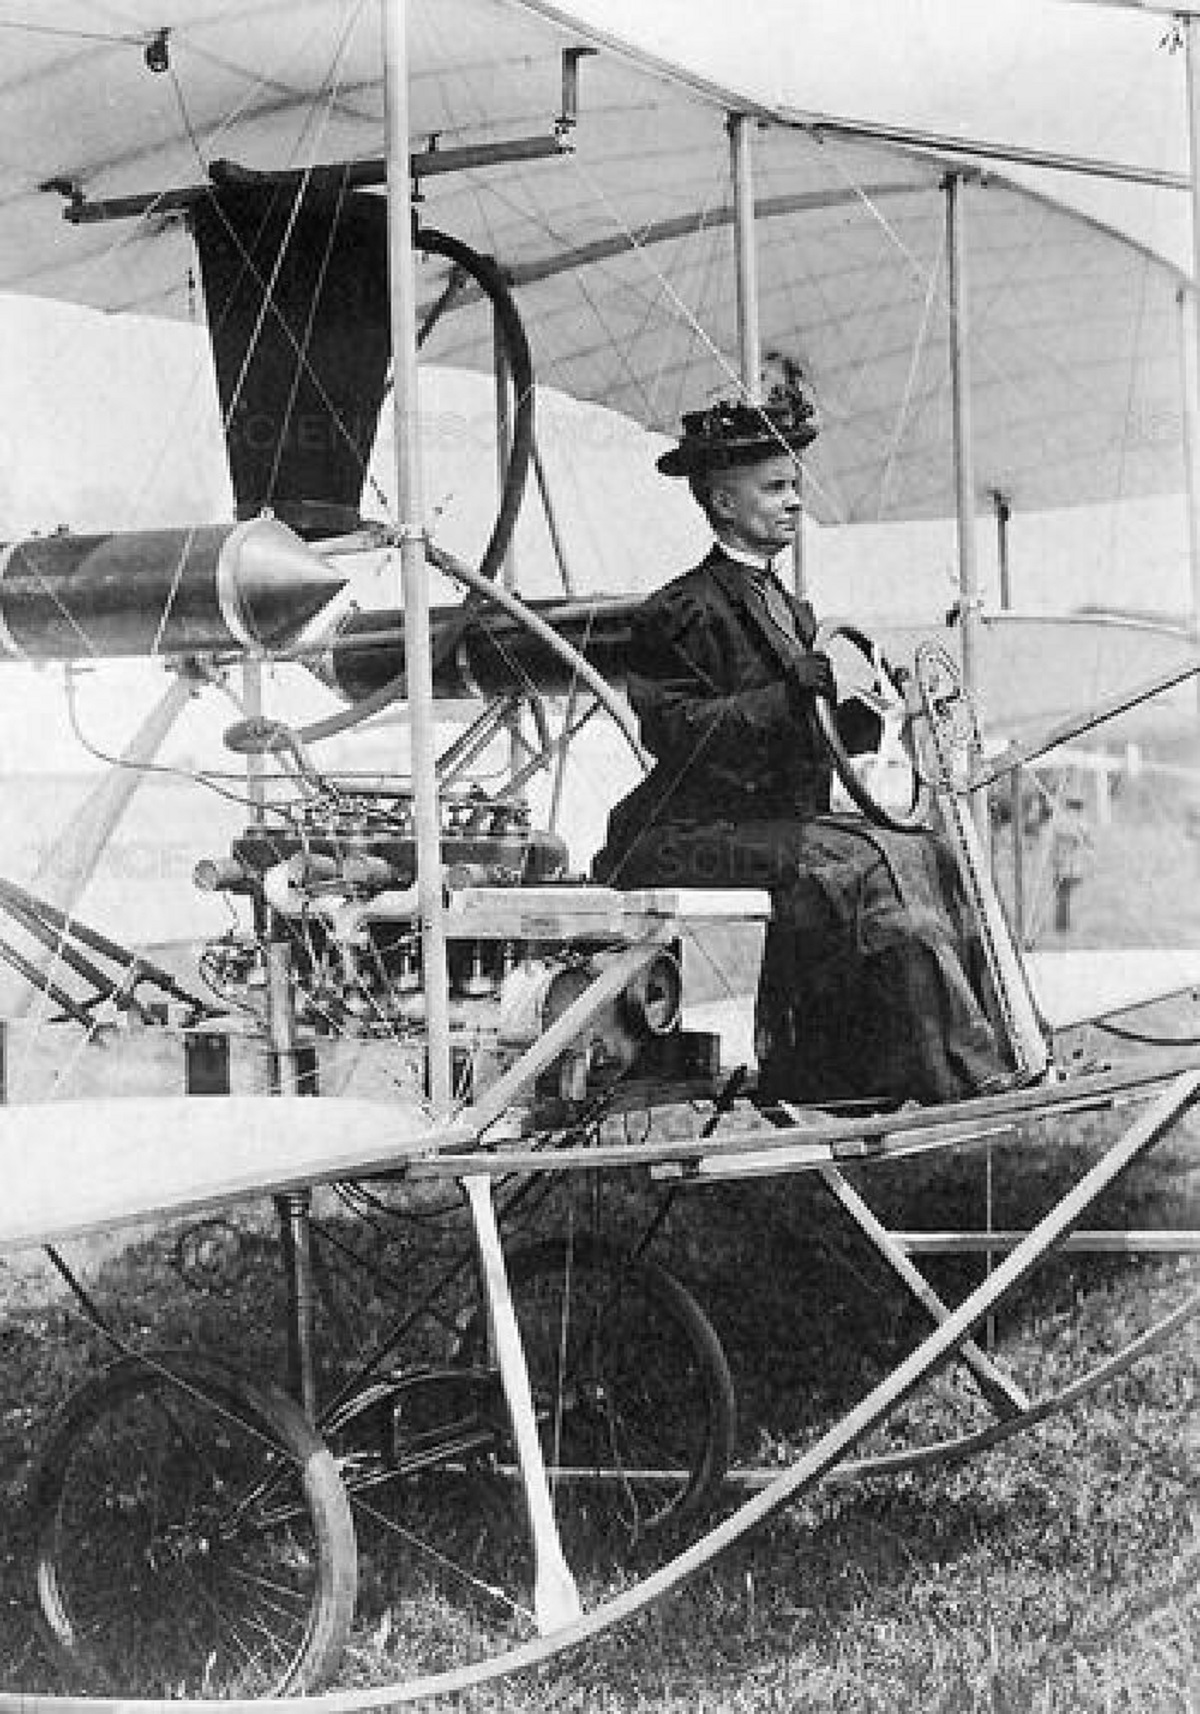 E. Lilian Todd, Self-Taught Inventor Considered To Be The First Woman In The World To Design And Build Her Own Aircraft, 1909